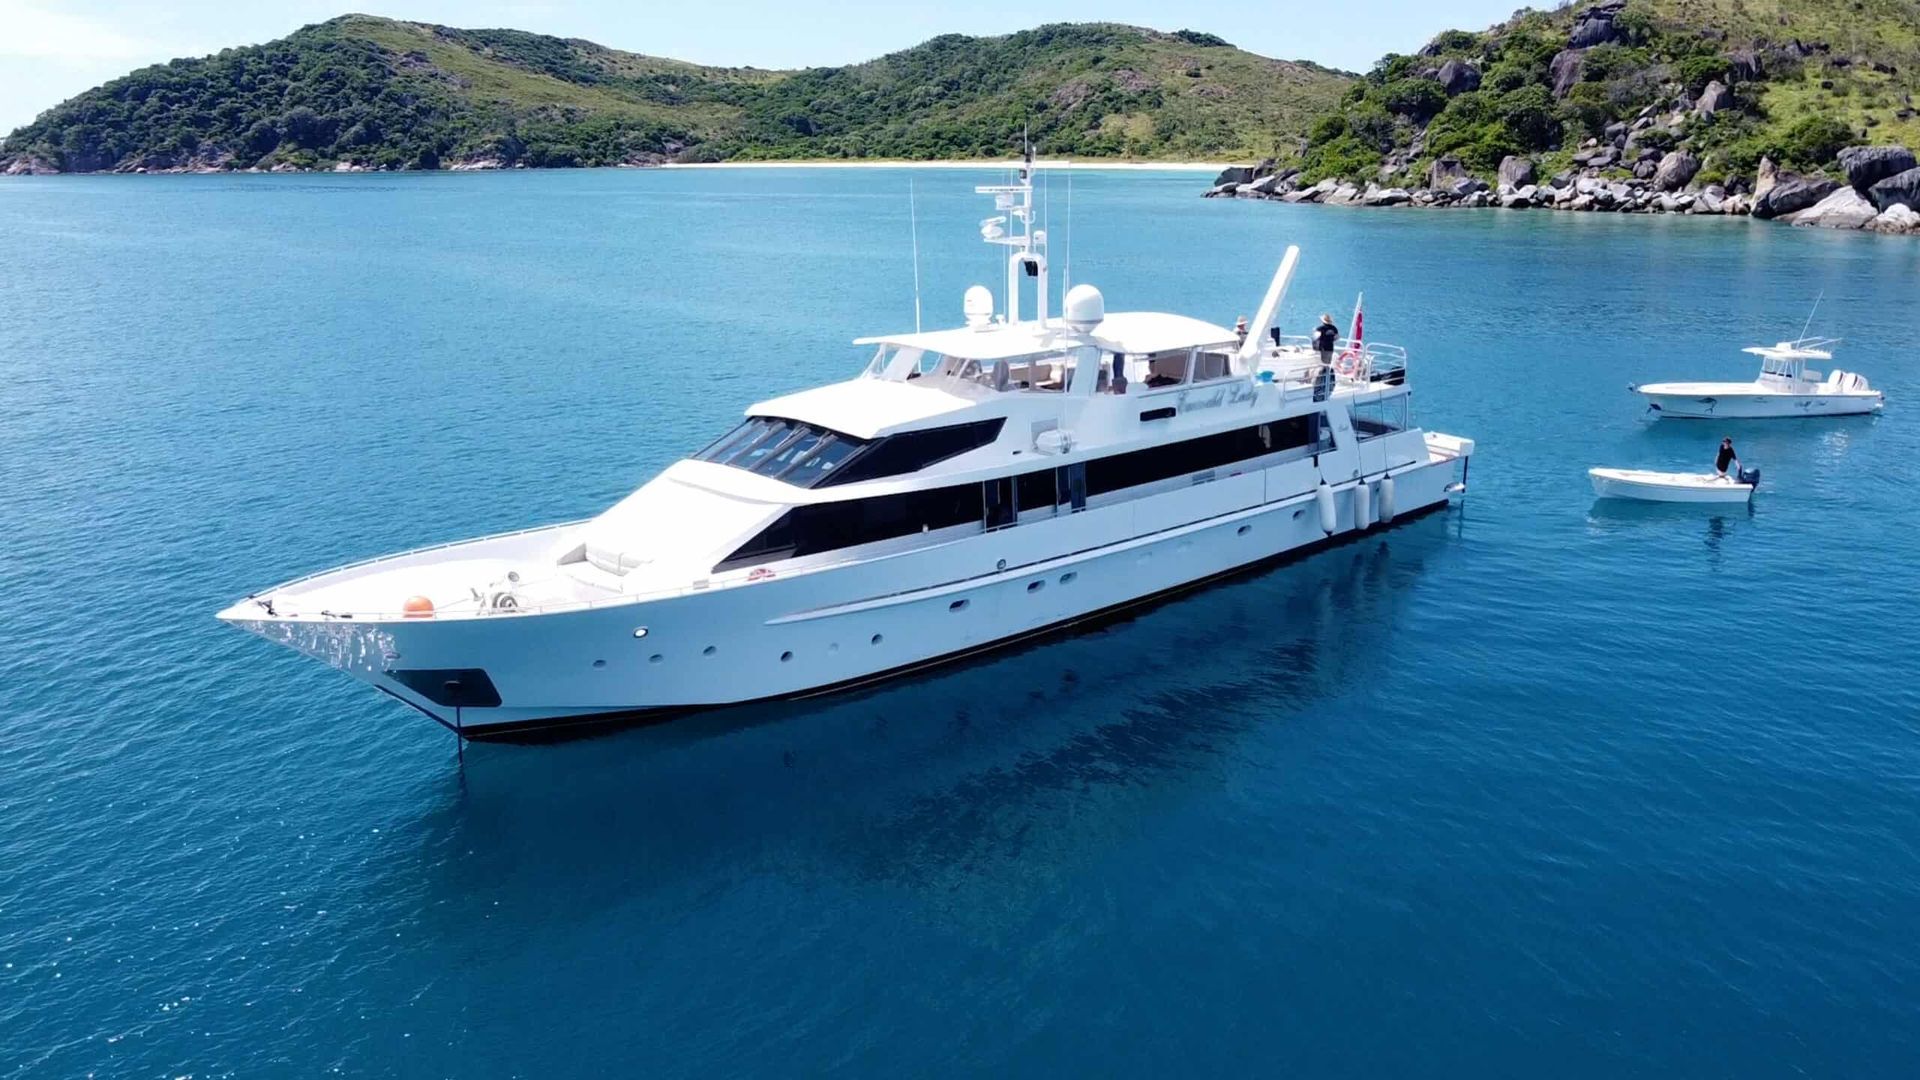 EMERALD LADY | From $11,000 Per Night | 10 Guests